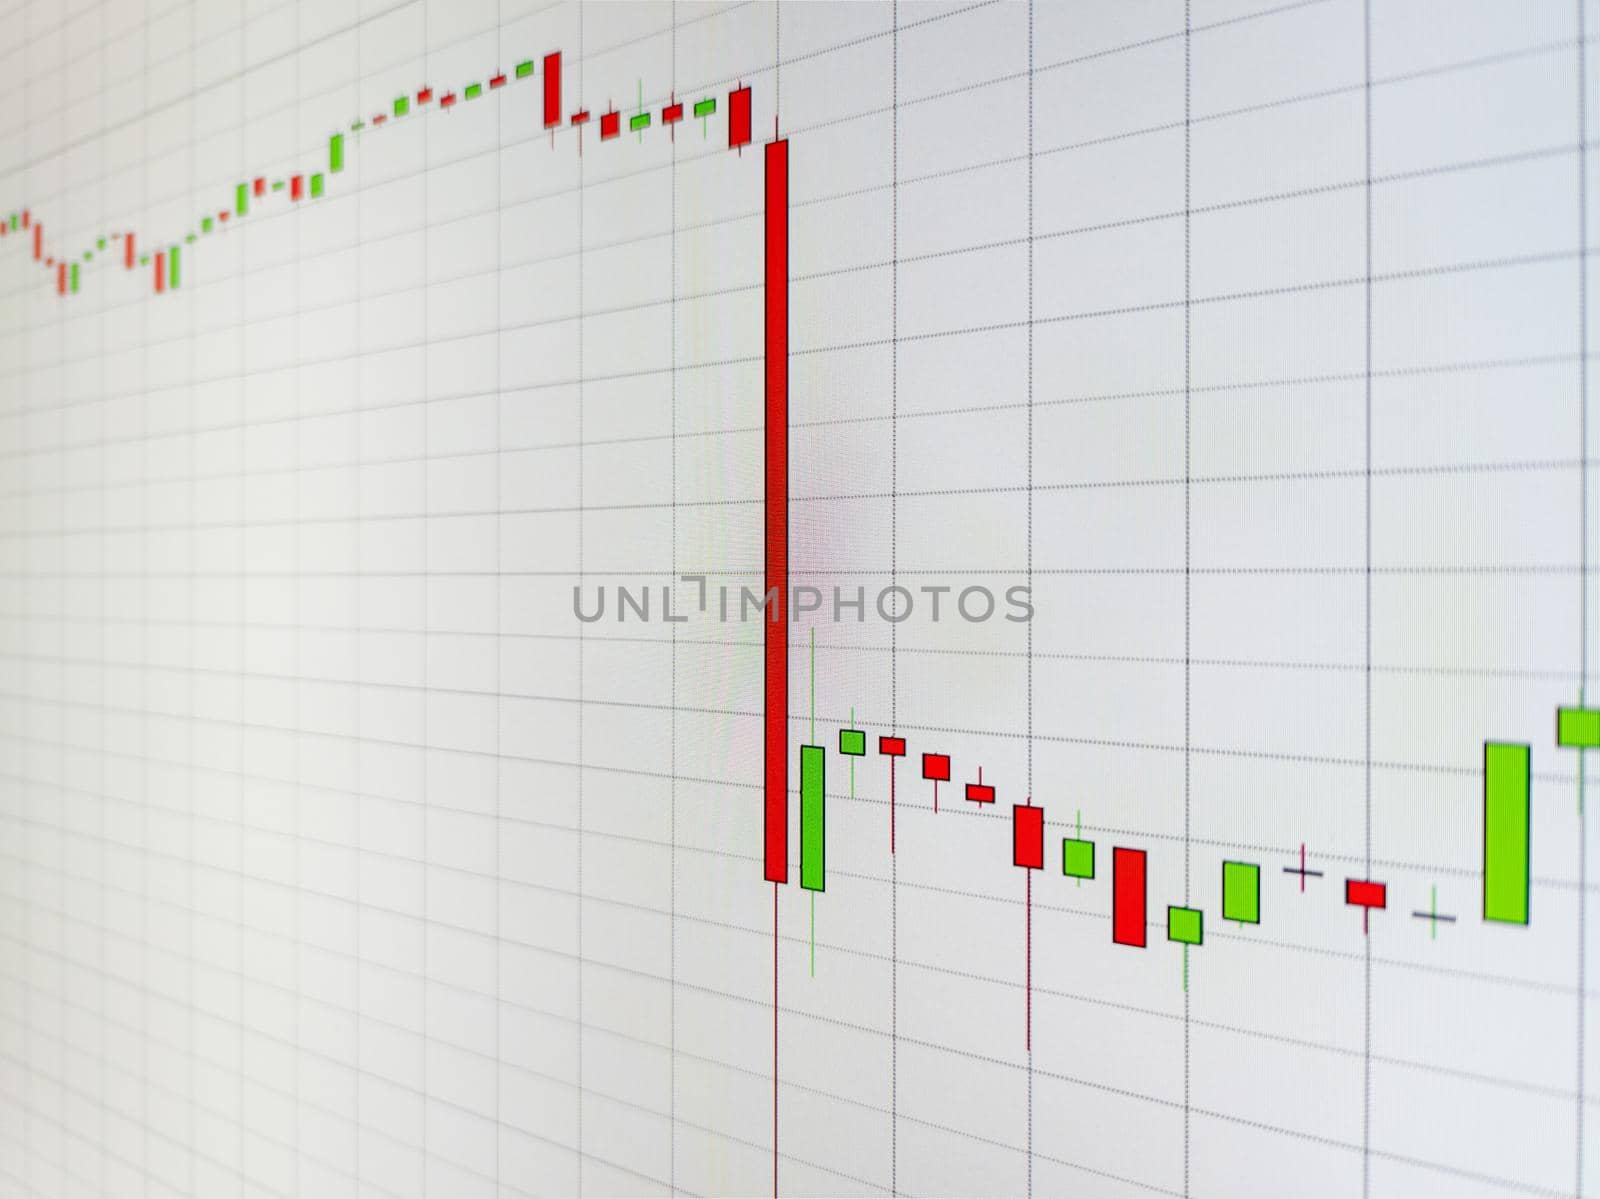 Abstract simple candlestick chart on white digital screen. Display of quotes pricing graph visualization. Stock market or cryptocurrency data chart, graph with grid on light background.